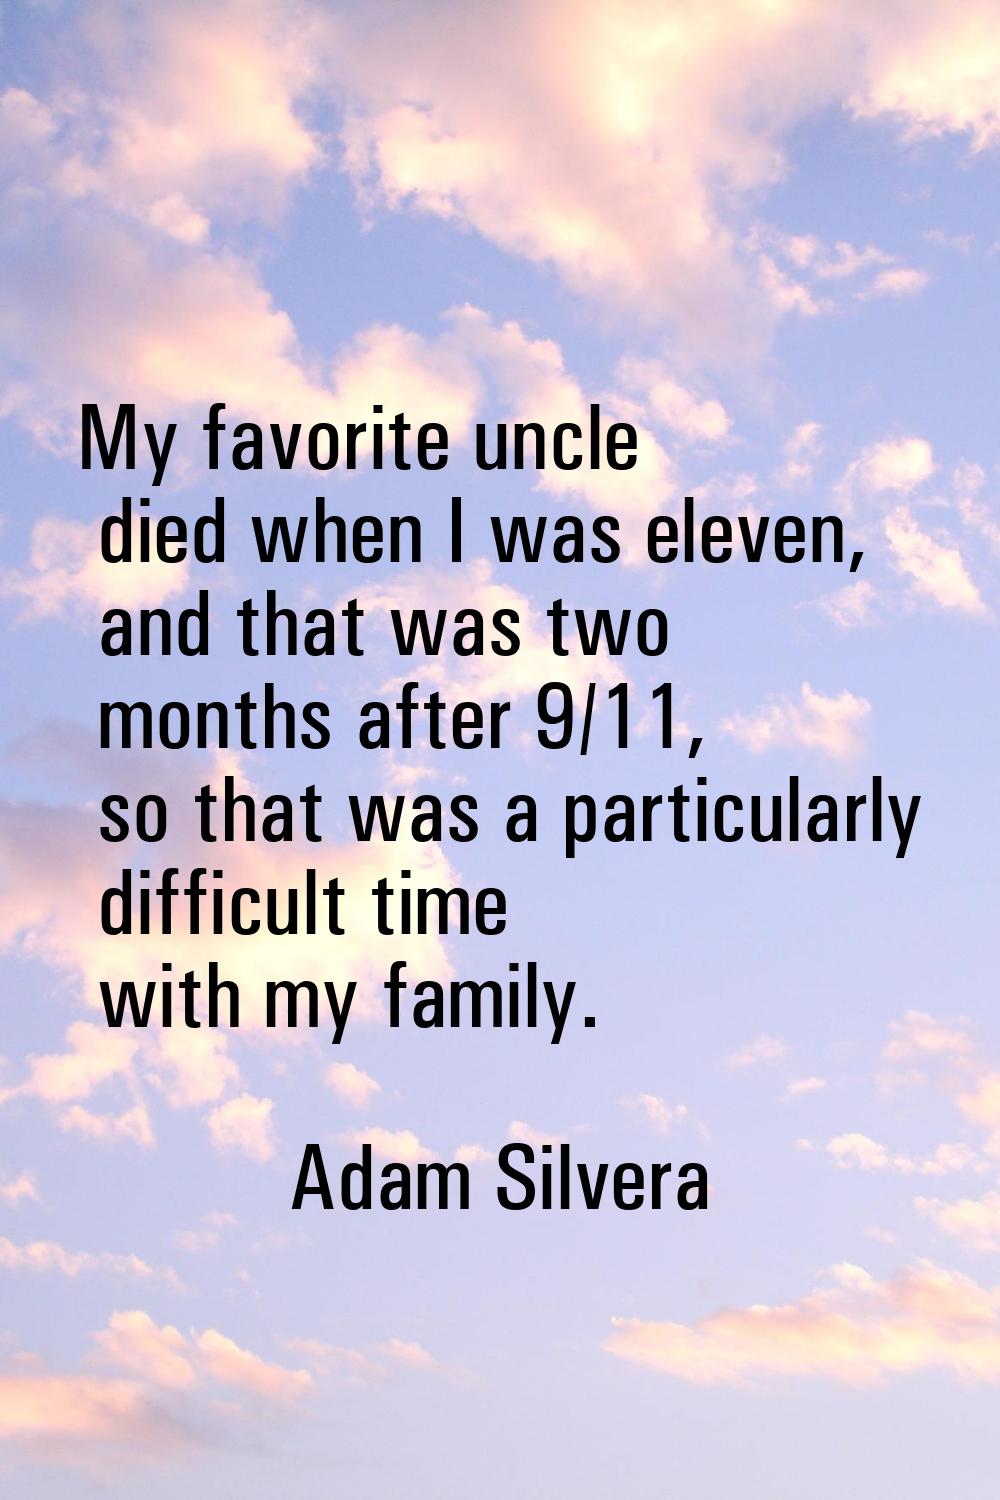 My favorite uncle died when I was eleven, and that was two months after 9/11, so that was a particu